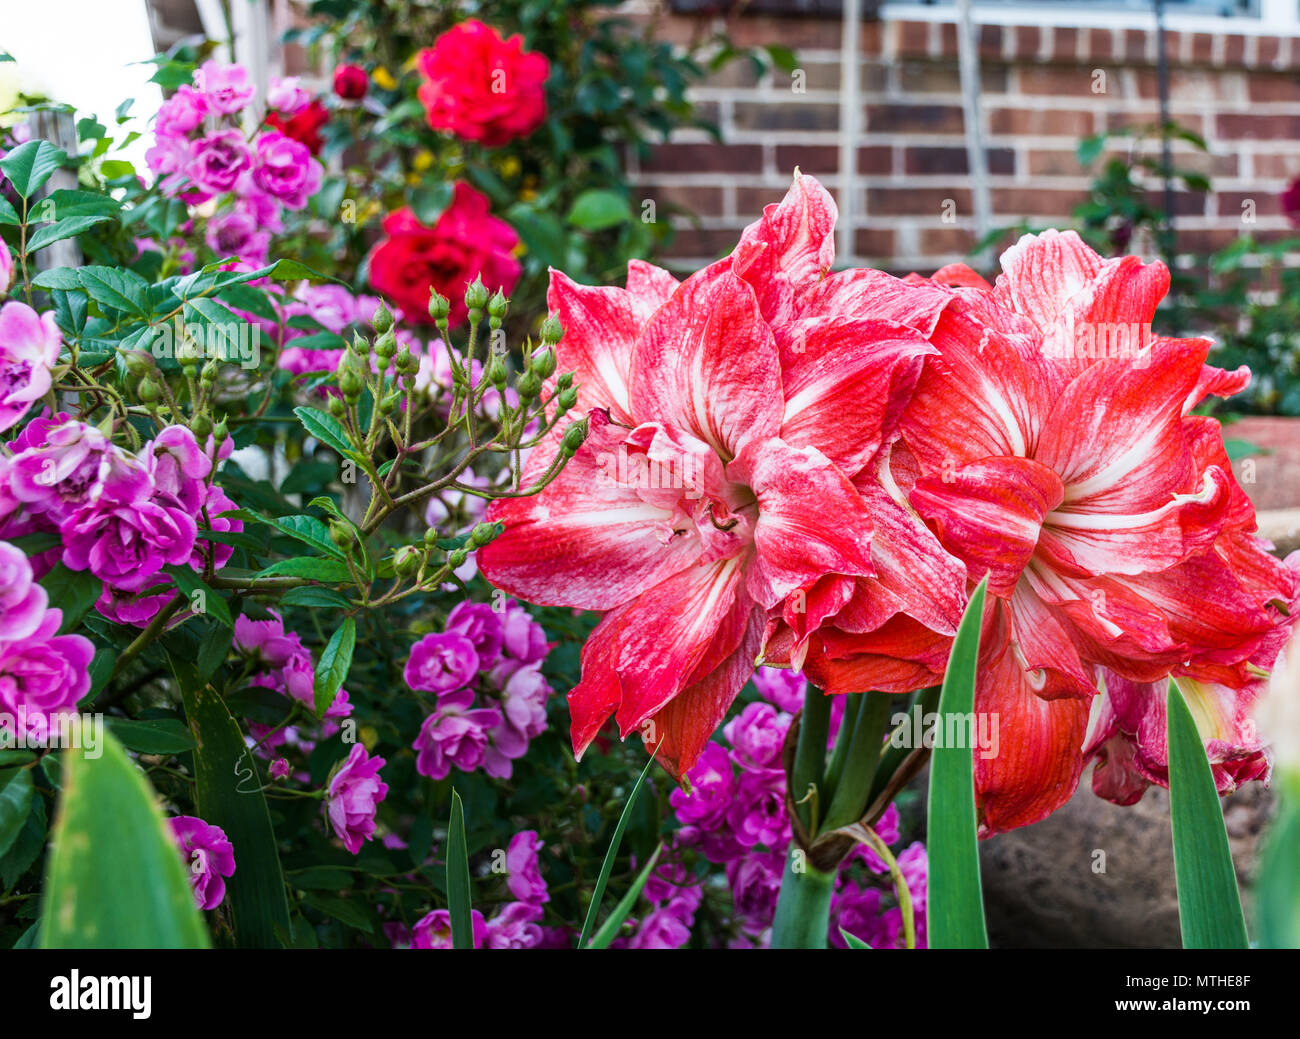 Peach, coral double-petal amaryllis with cascading Excellenz von Schubert antique roses in front flower border at sunset. Brick house background. Stock Photo